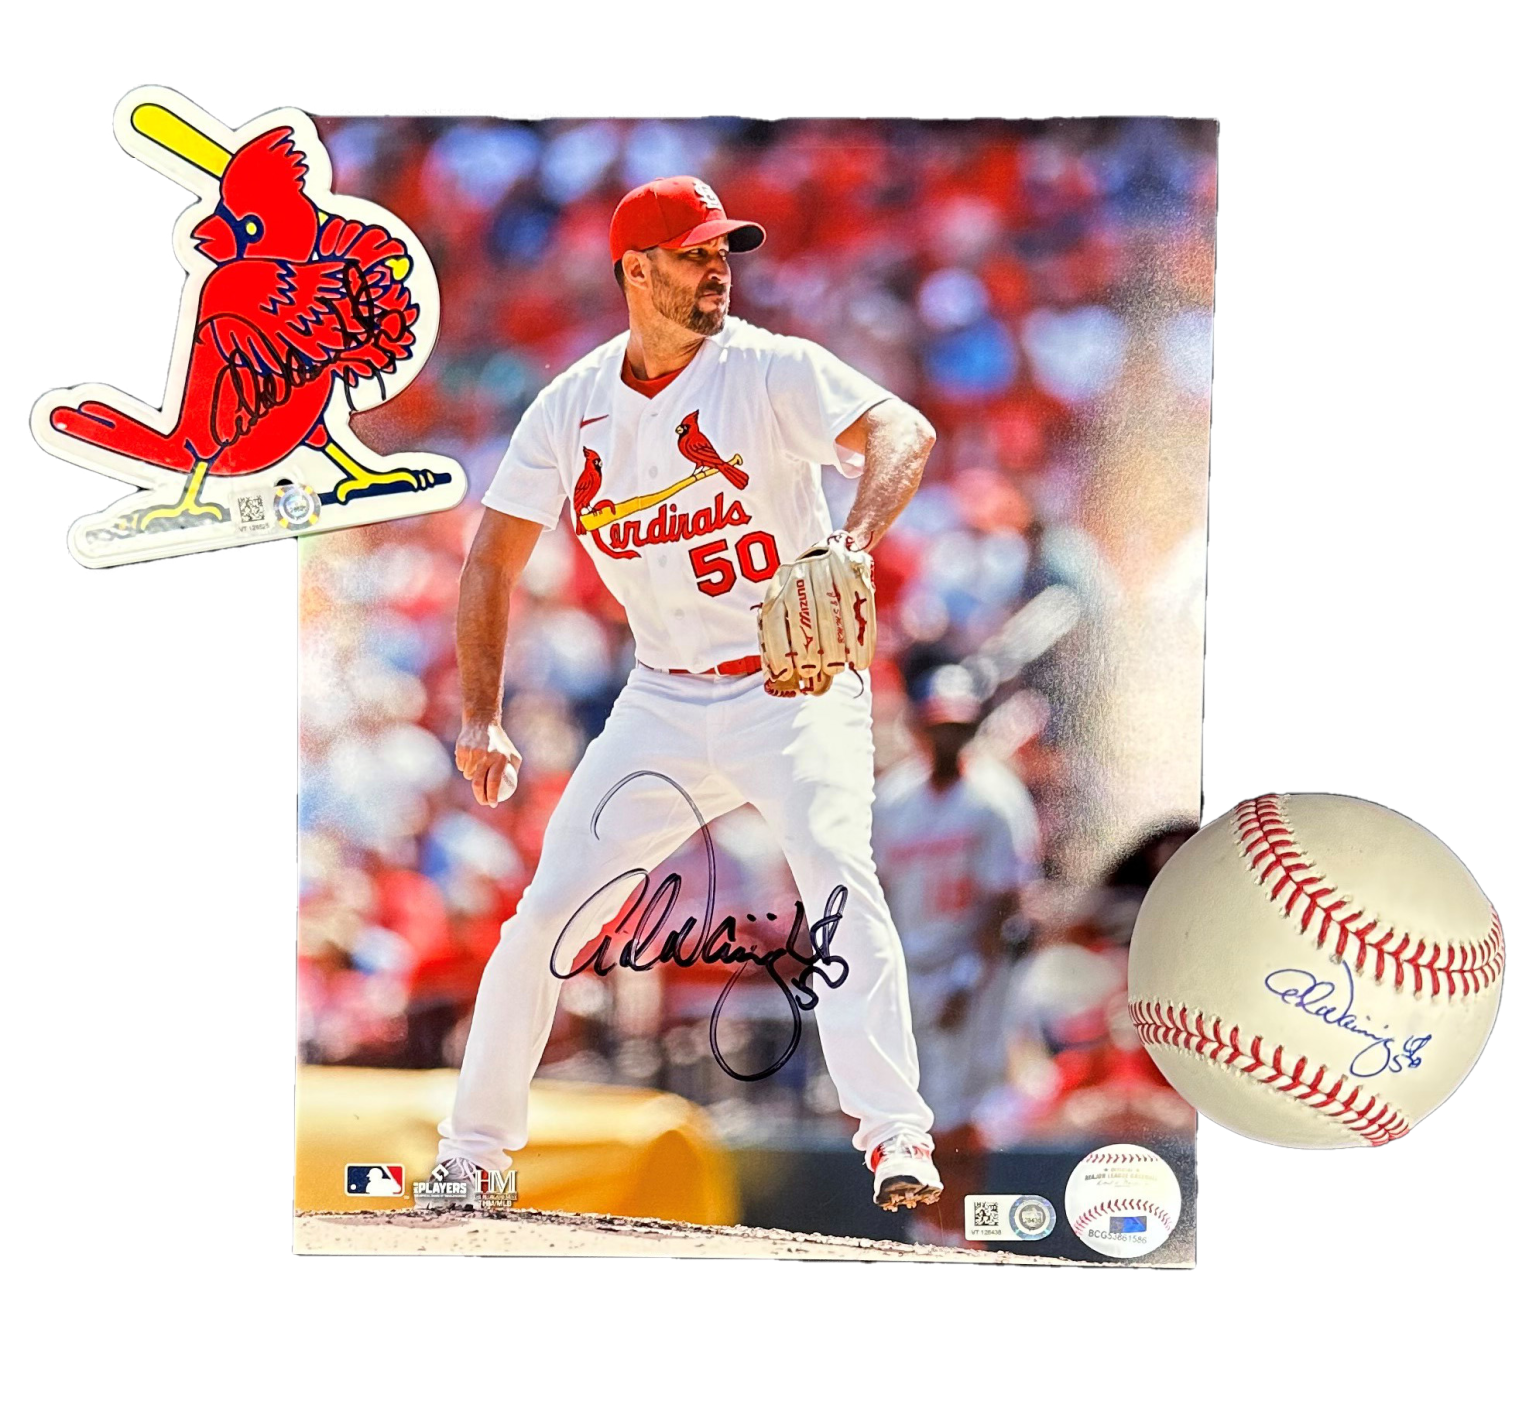 St. Louis Cardinals Adorn Faded Flame Red AC0 / Xs